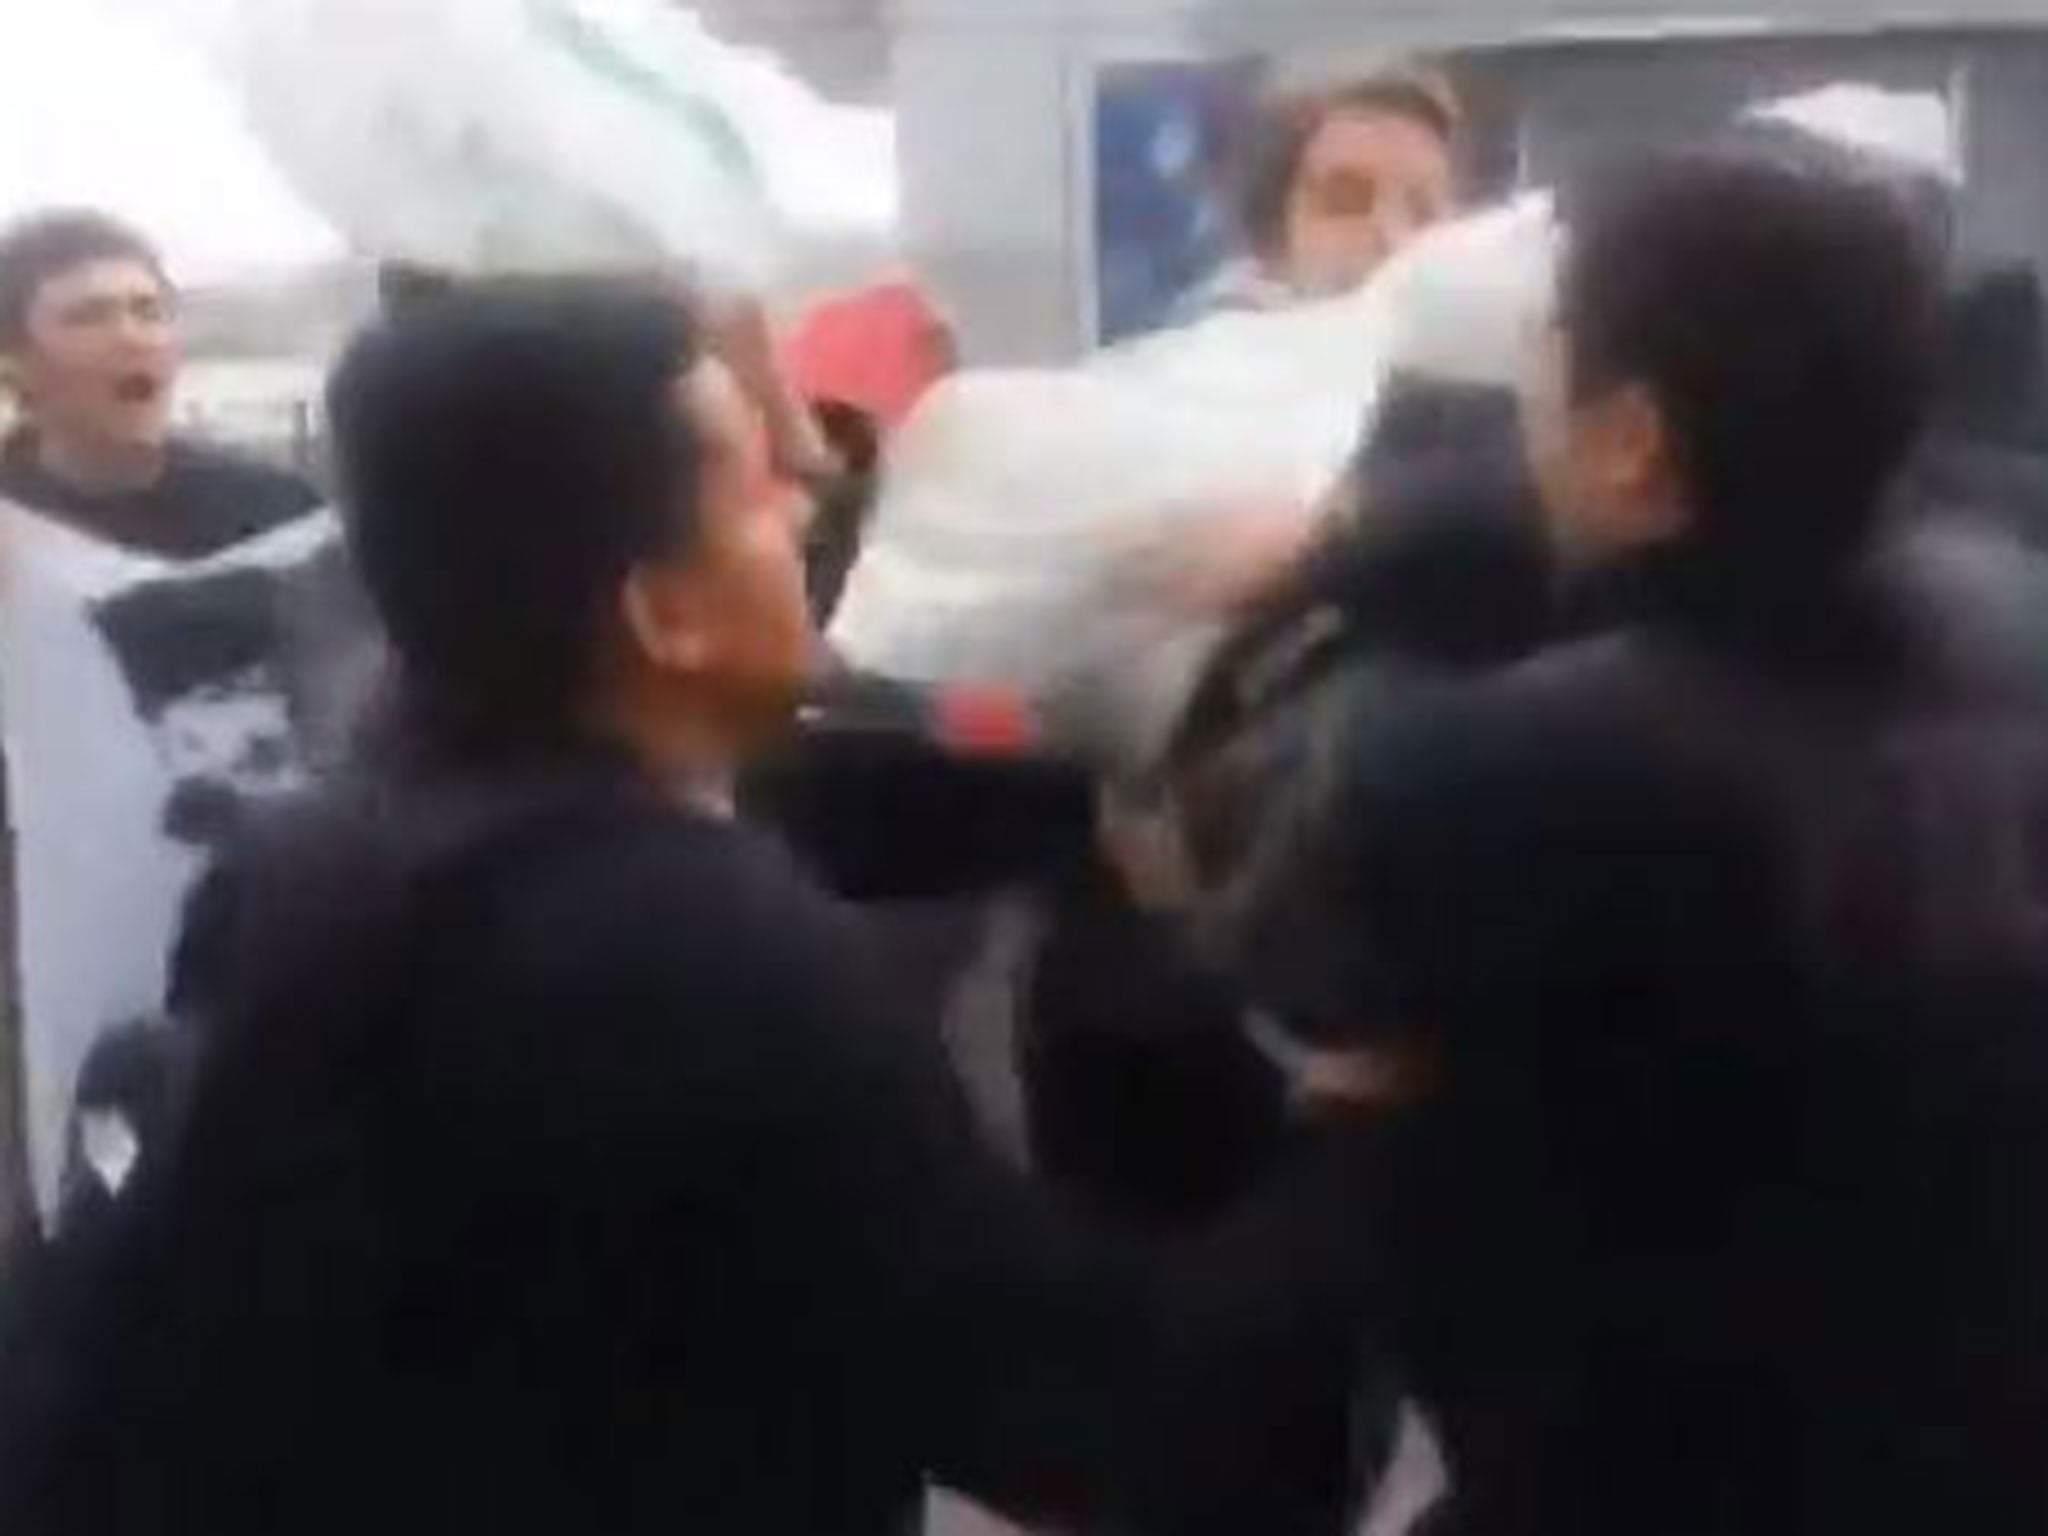 Footage has emerged of anti-American protesters in Turkey as they assaulted three US Navy soldiers, placing white sacks over their heads while chanting "Yankee, go home!"